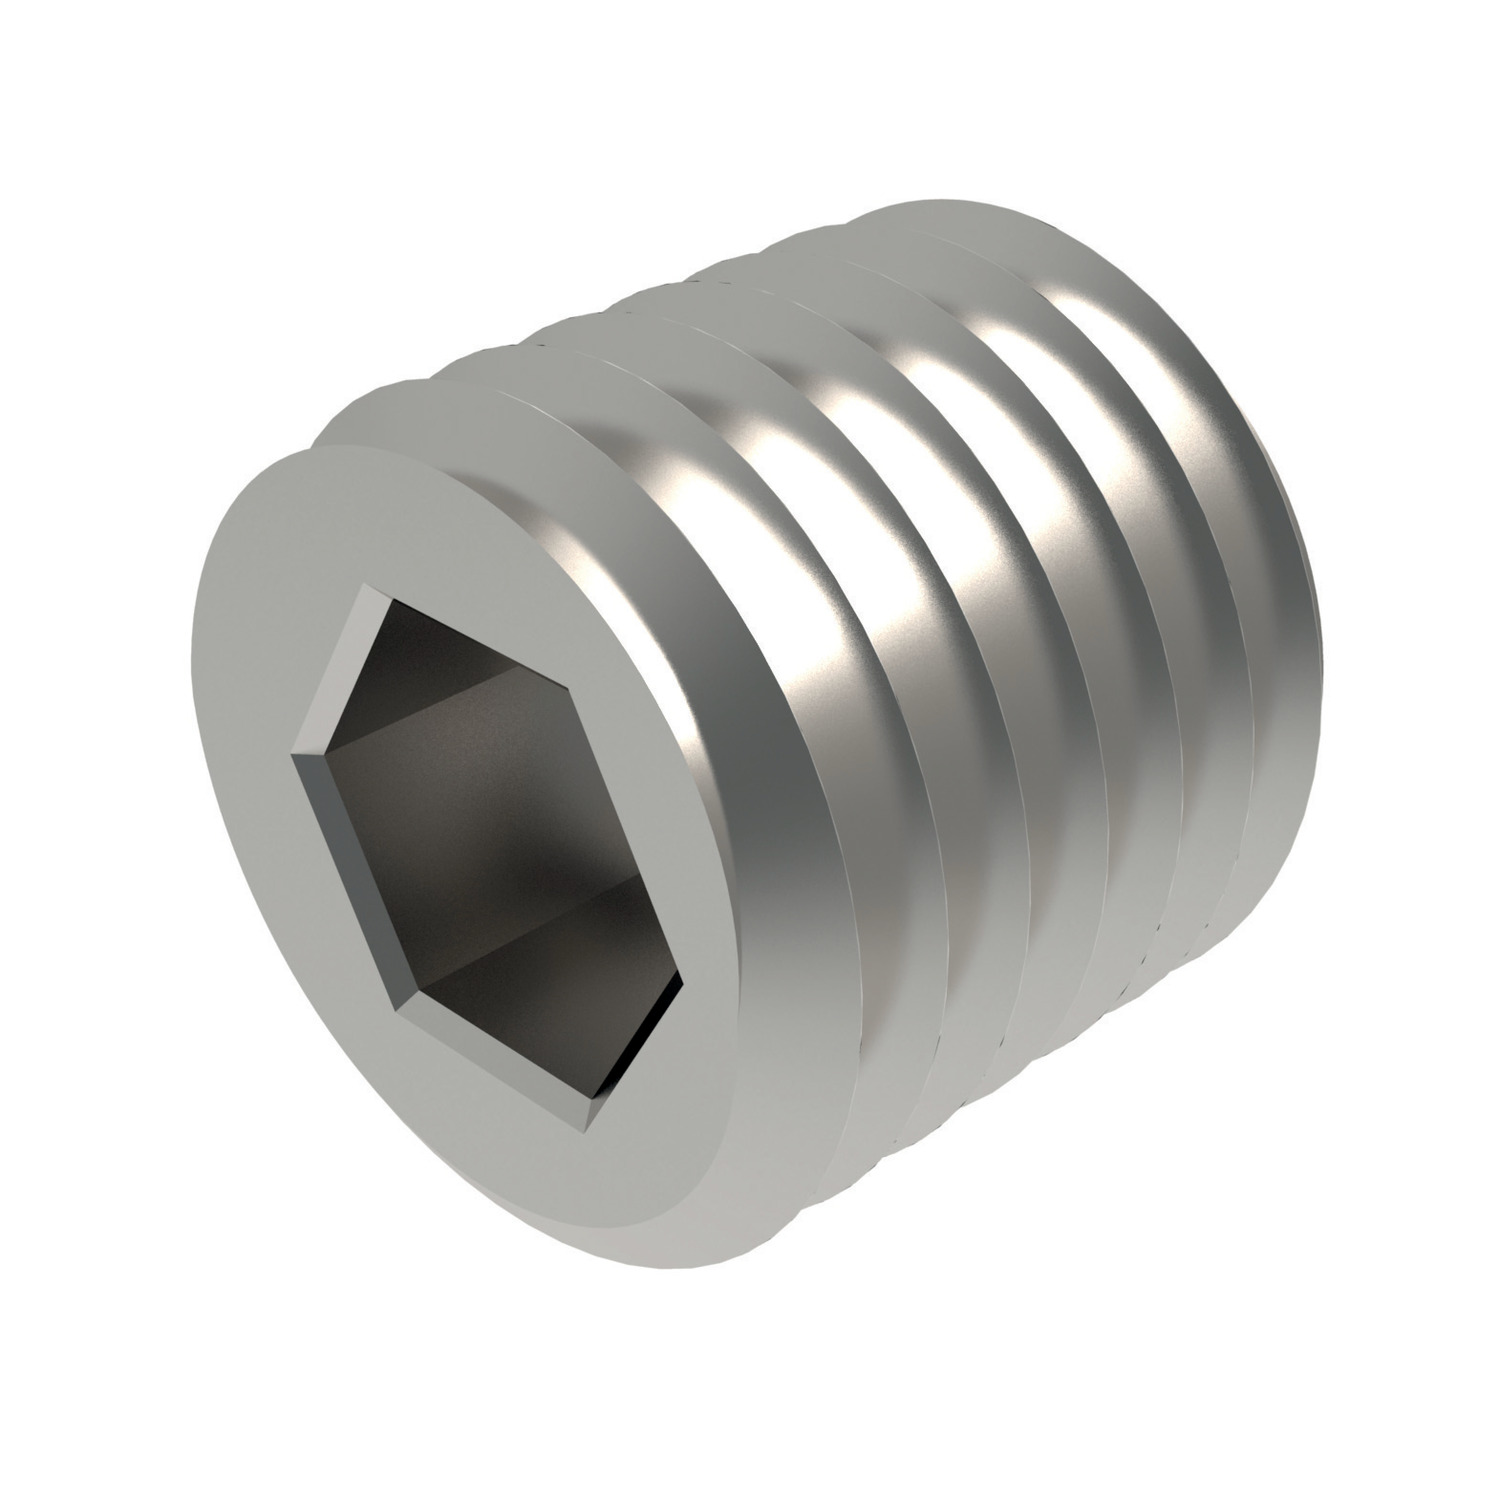 P0199.120-004-A2 Threaded Restrictor M12x1 0.38 orifice A2 stainless steel. DANGER: Ensure this part is installed according to instructions in the product data sheet and installation notes. Holes must be completely free of oil, grease and debris.